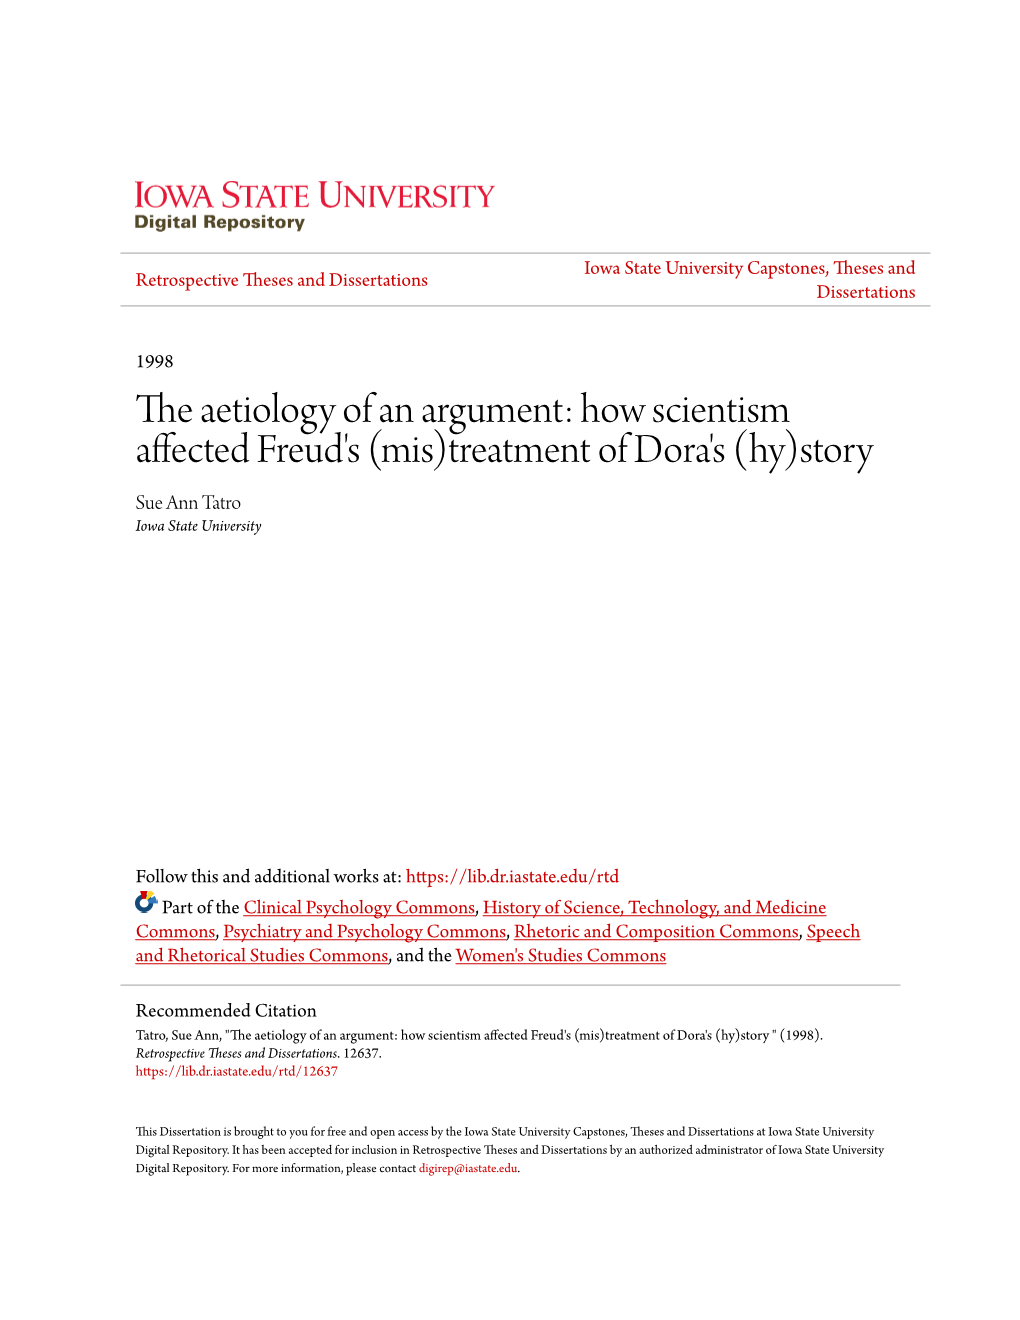 How Scientism Affected Freud's (Mis)Treatment of Dora's (Hy)Story Sue Ann Tatro Iowa State University